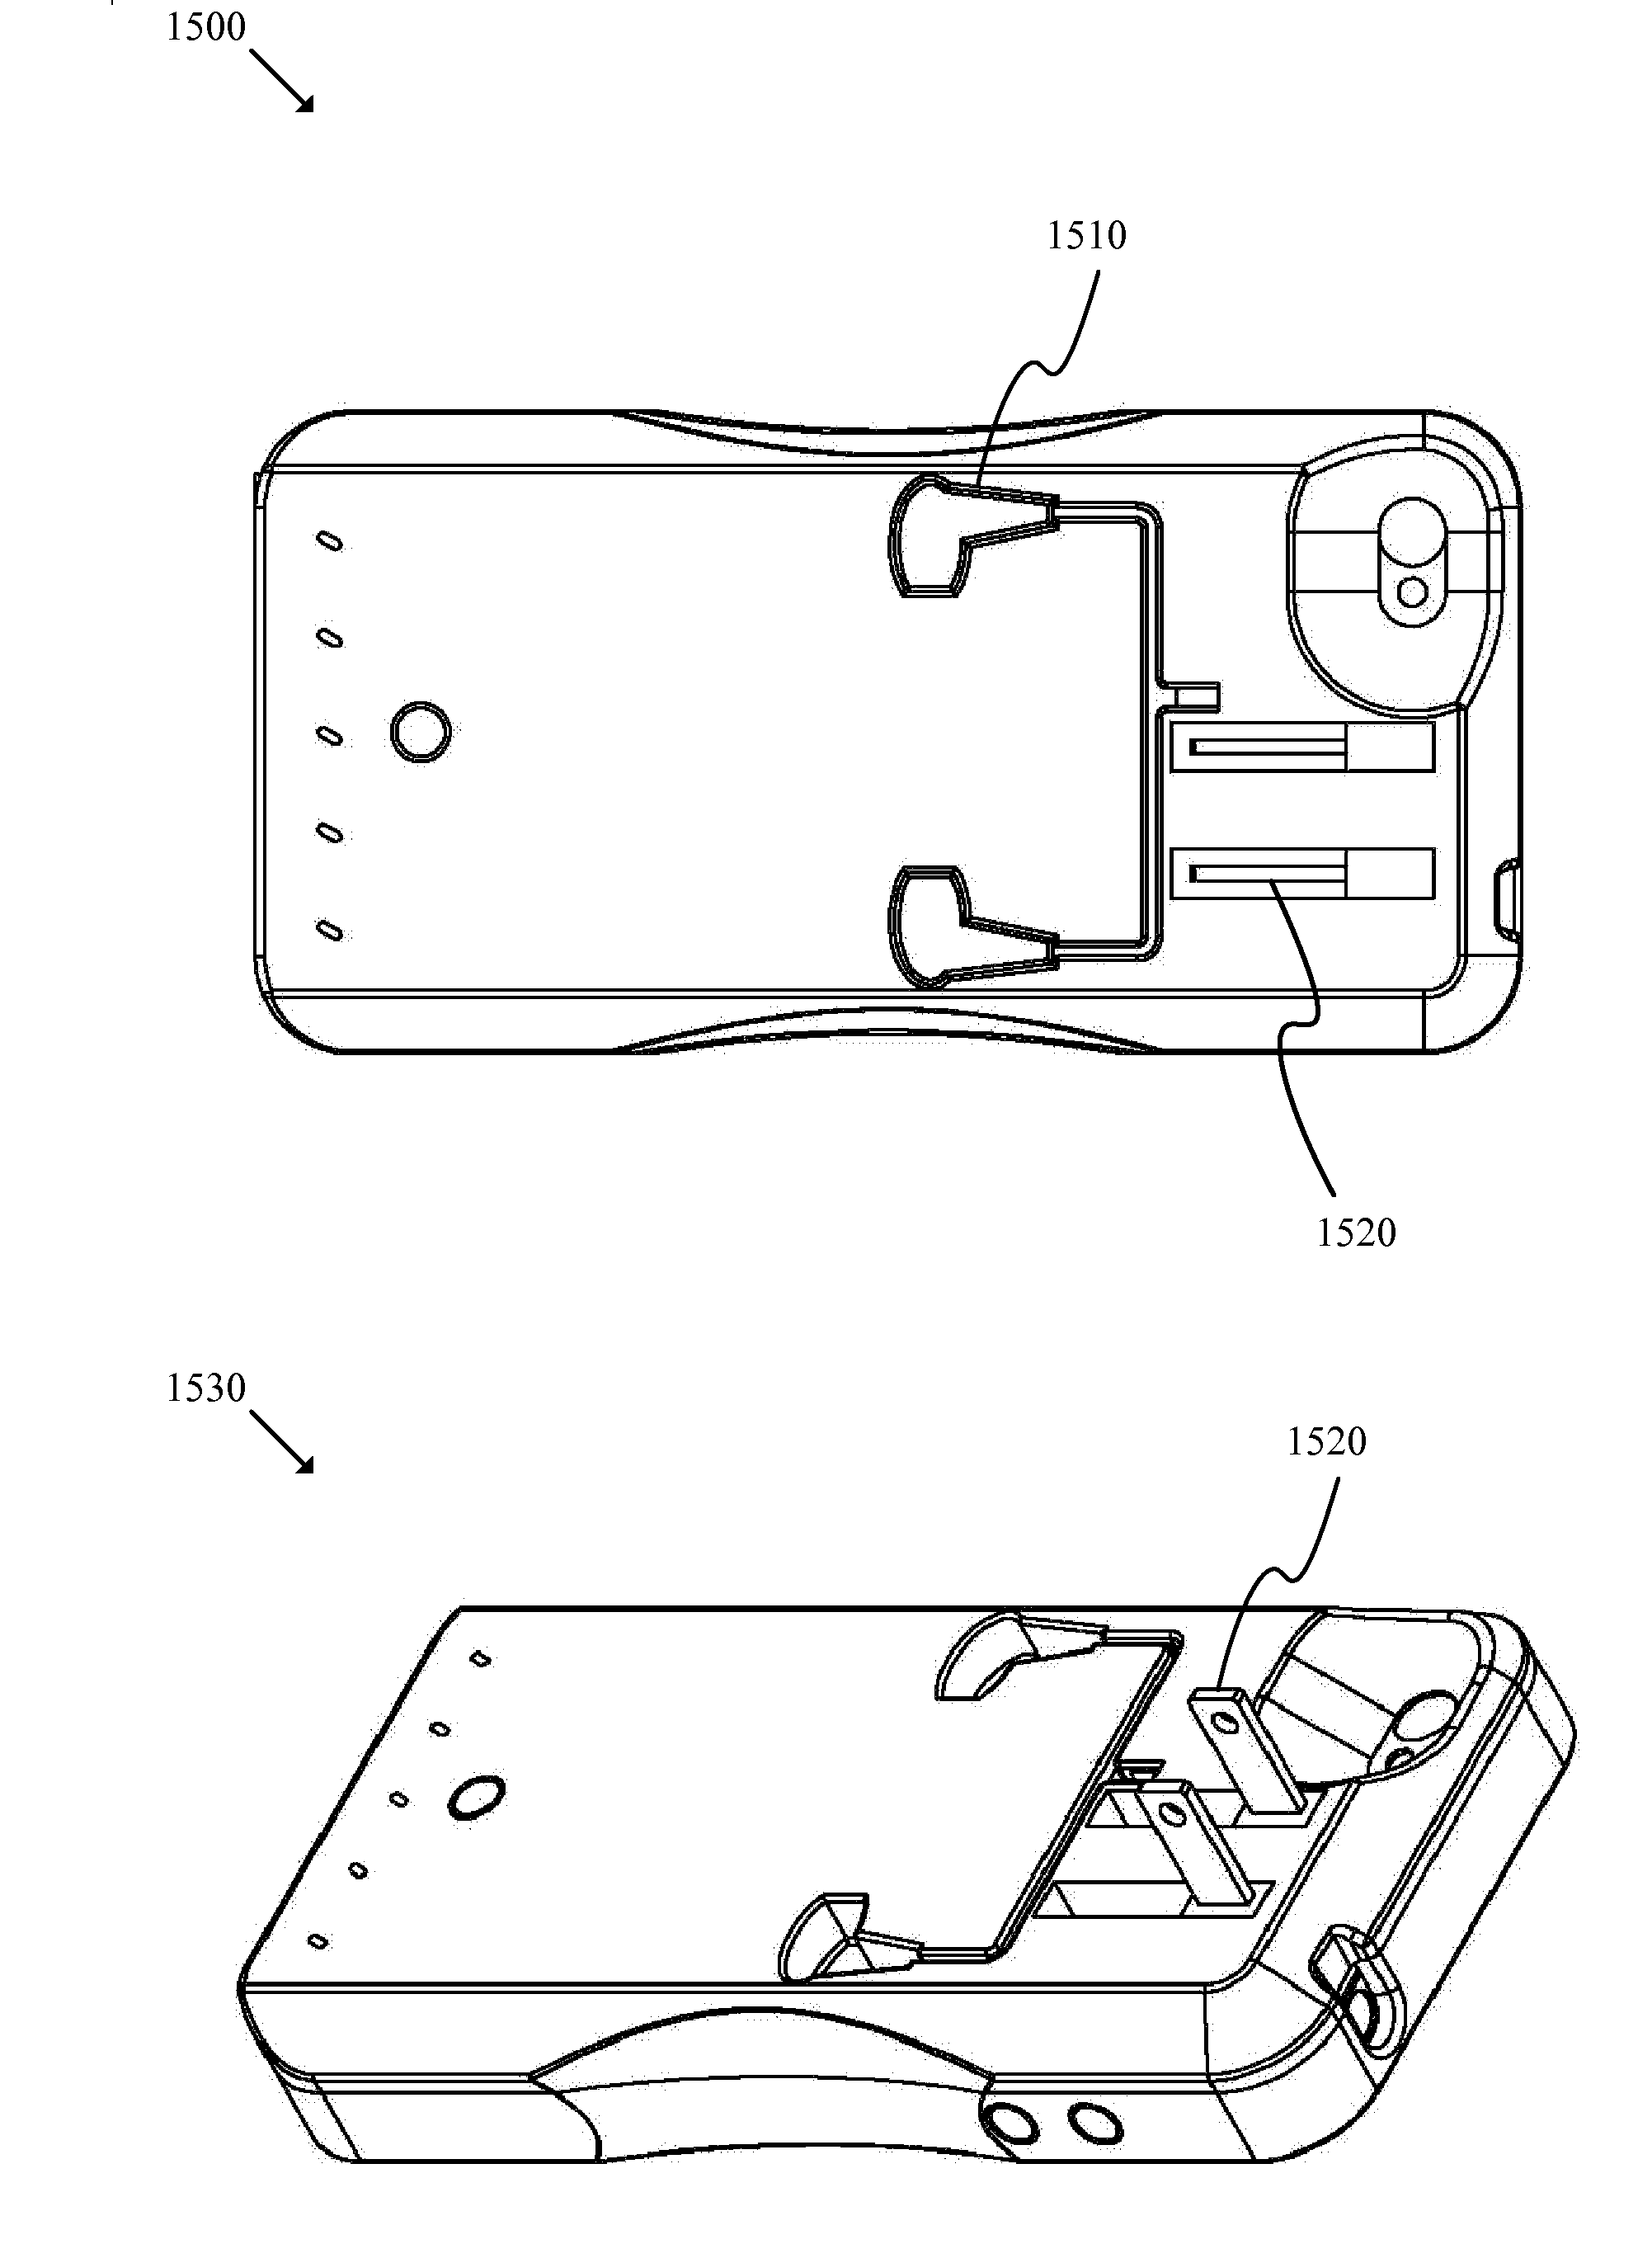 Integrated Battery Backup and Charging for Mobile Devices